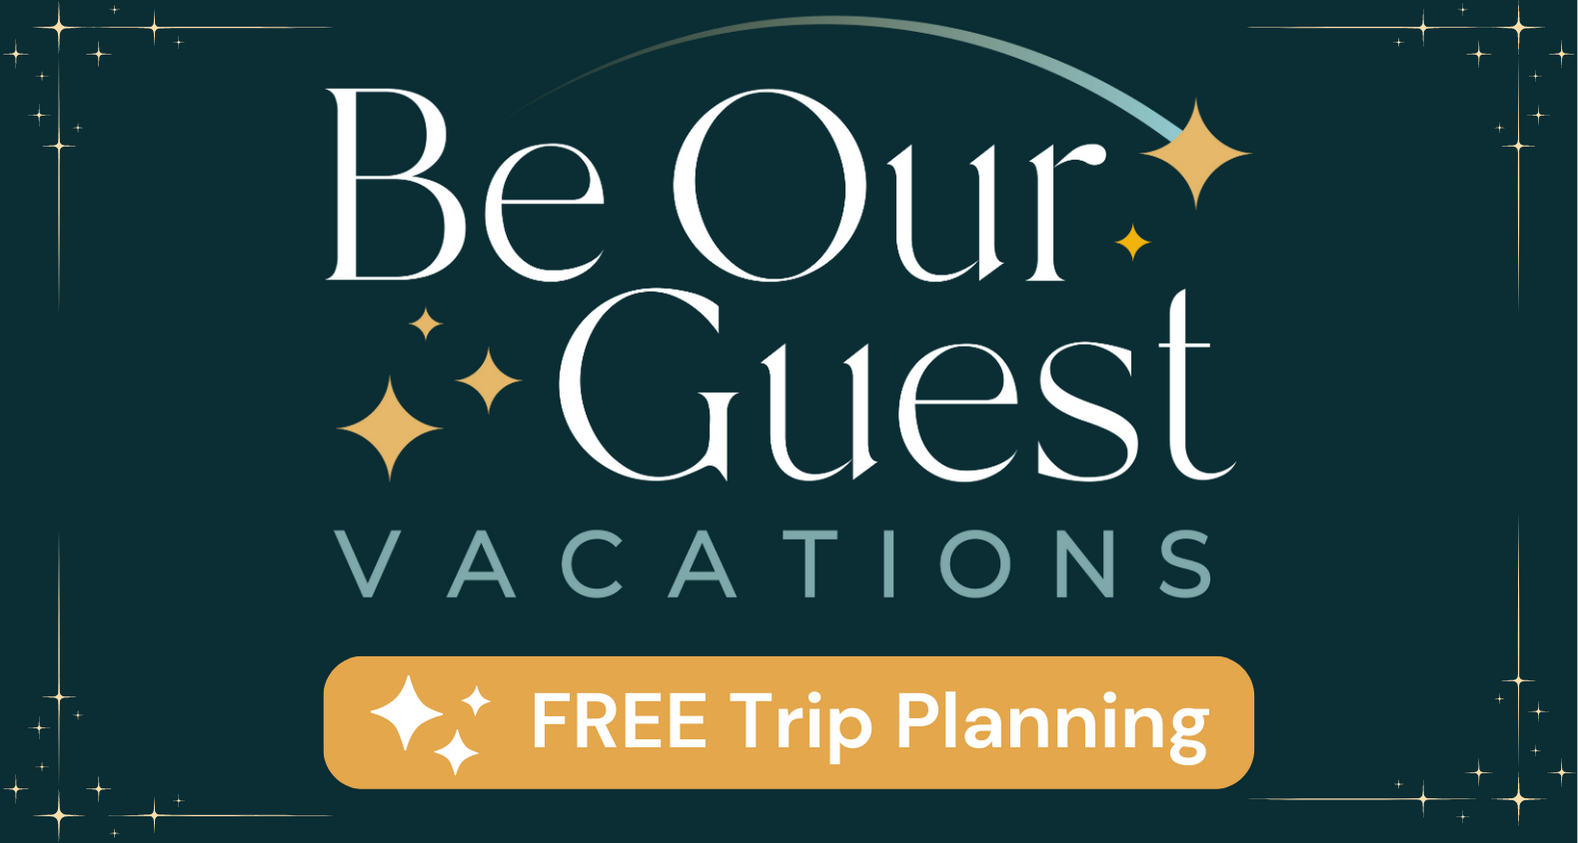 Be Our Guests Vacations